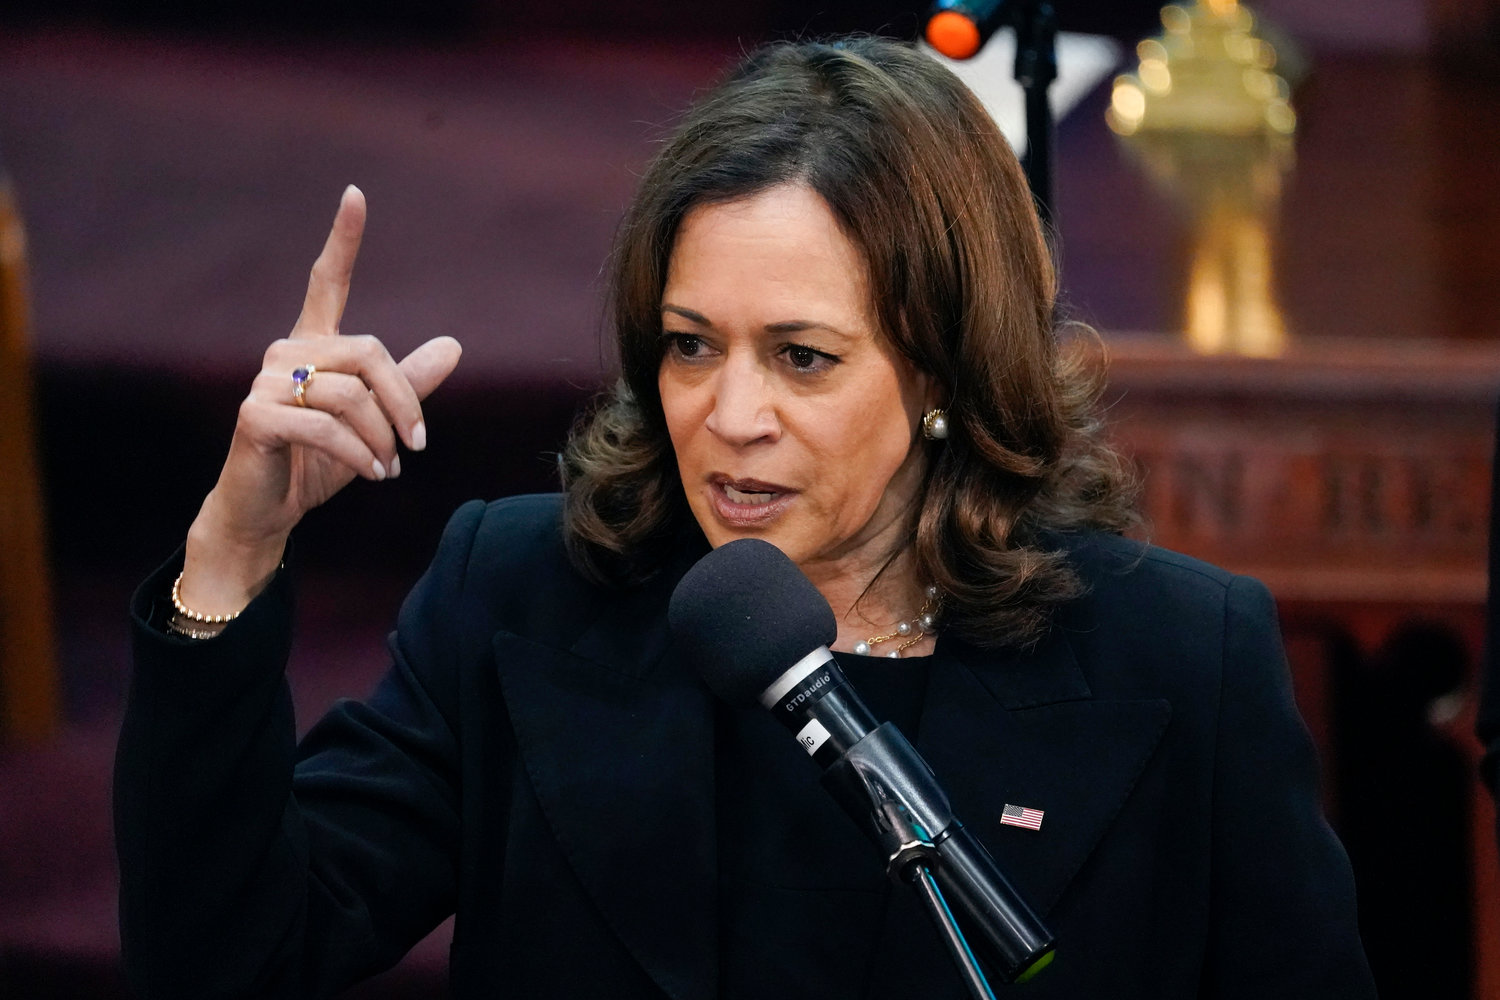 Vice President Kamala Harris speaks at a memorial service for Ruth Whitfield, a victim of the Buffalo supermarket shooting, at Mt. Olive Baptist Church, Saturday, May 28, 2022, in Buffalo, N.Y.